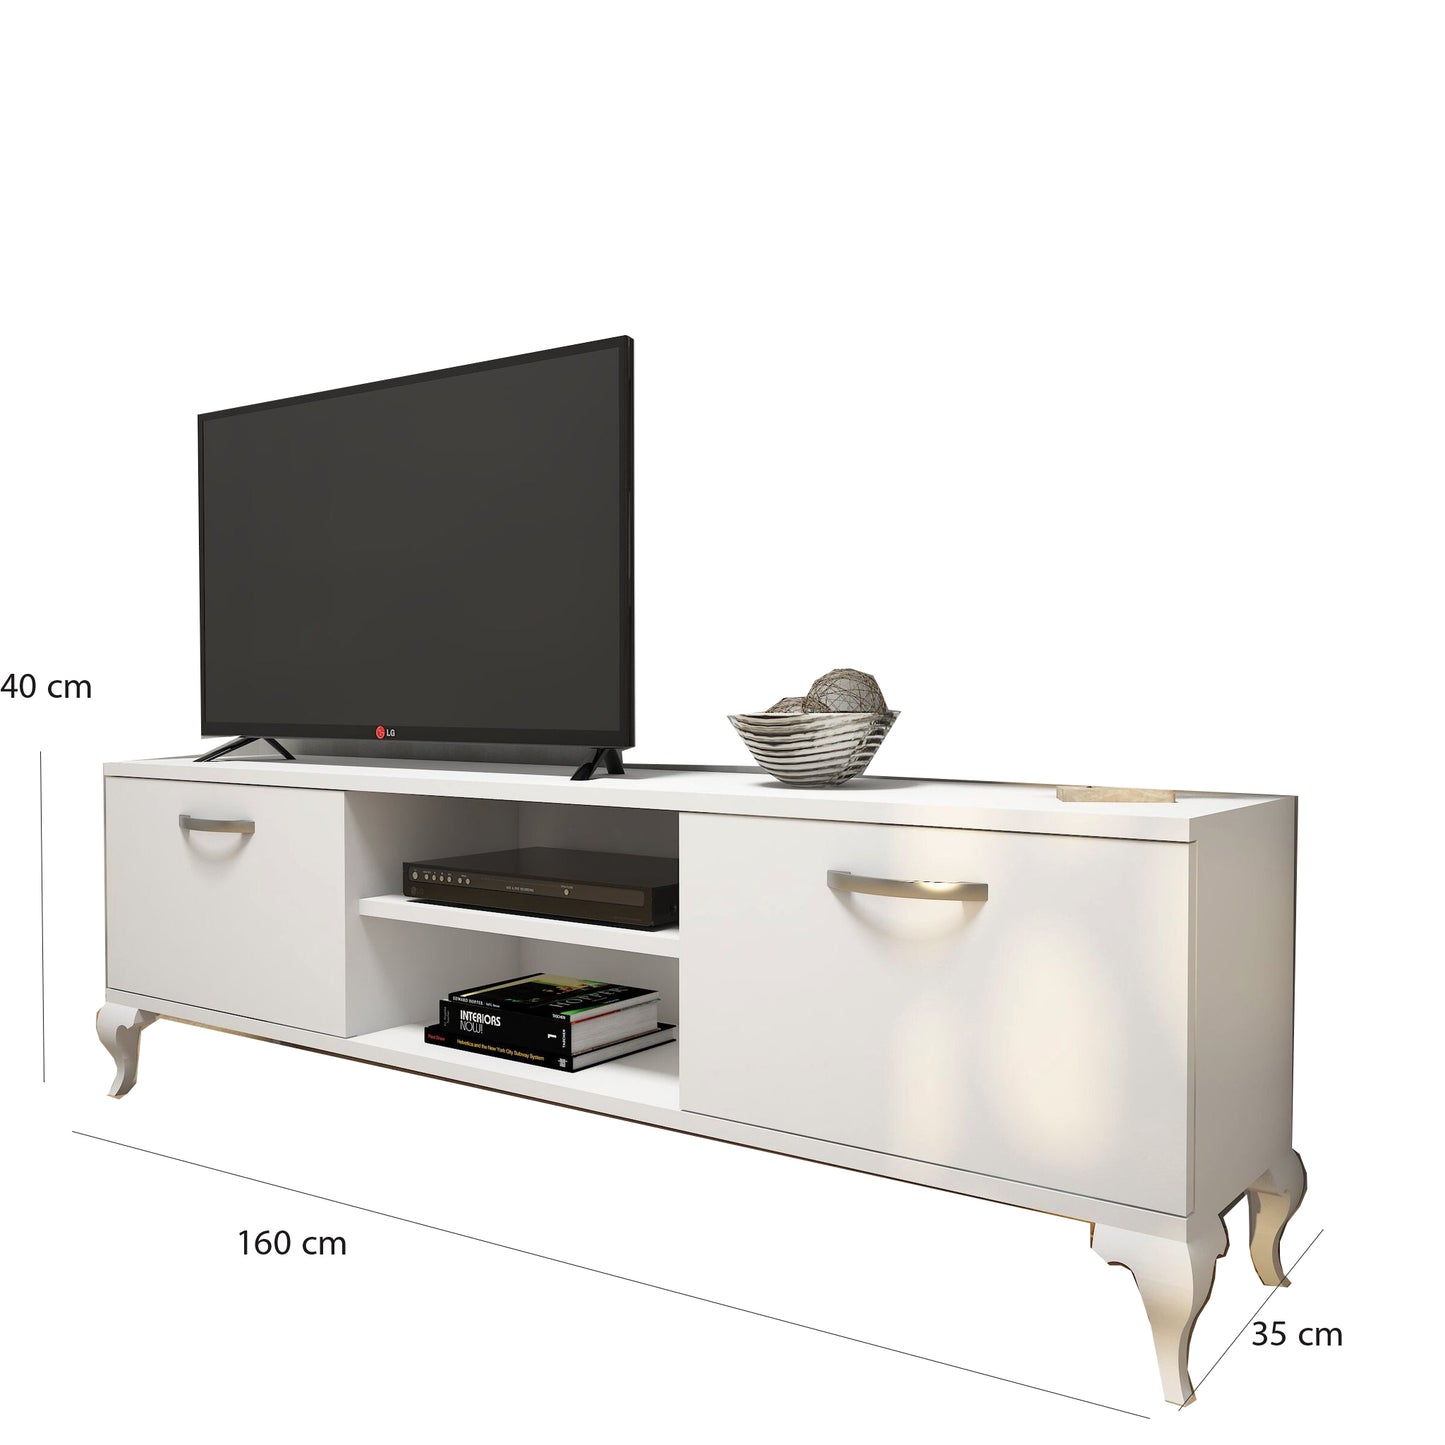 TV table with two decorative shelves 35 x 160 cm - FNH127